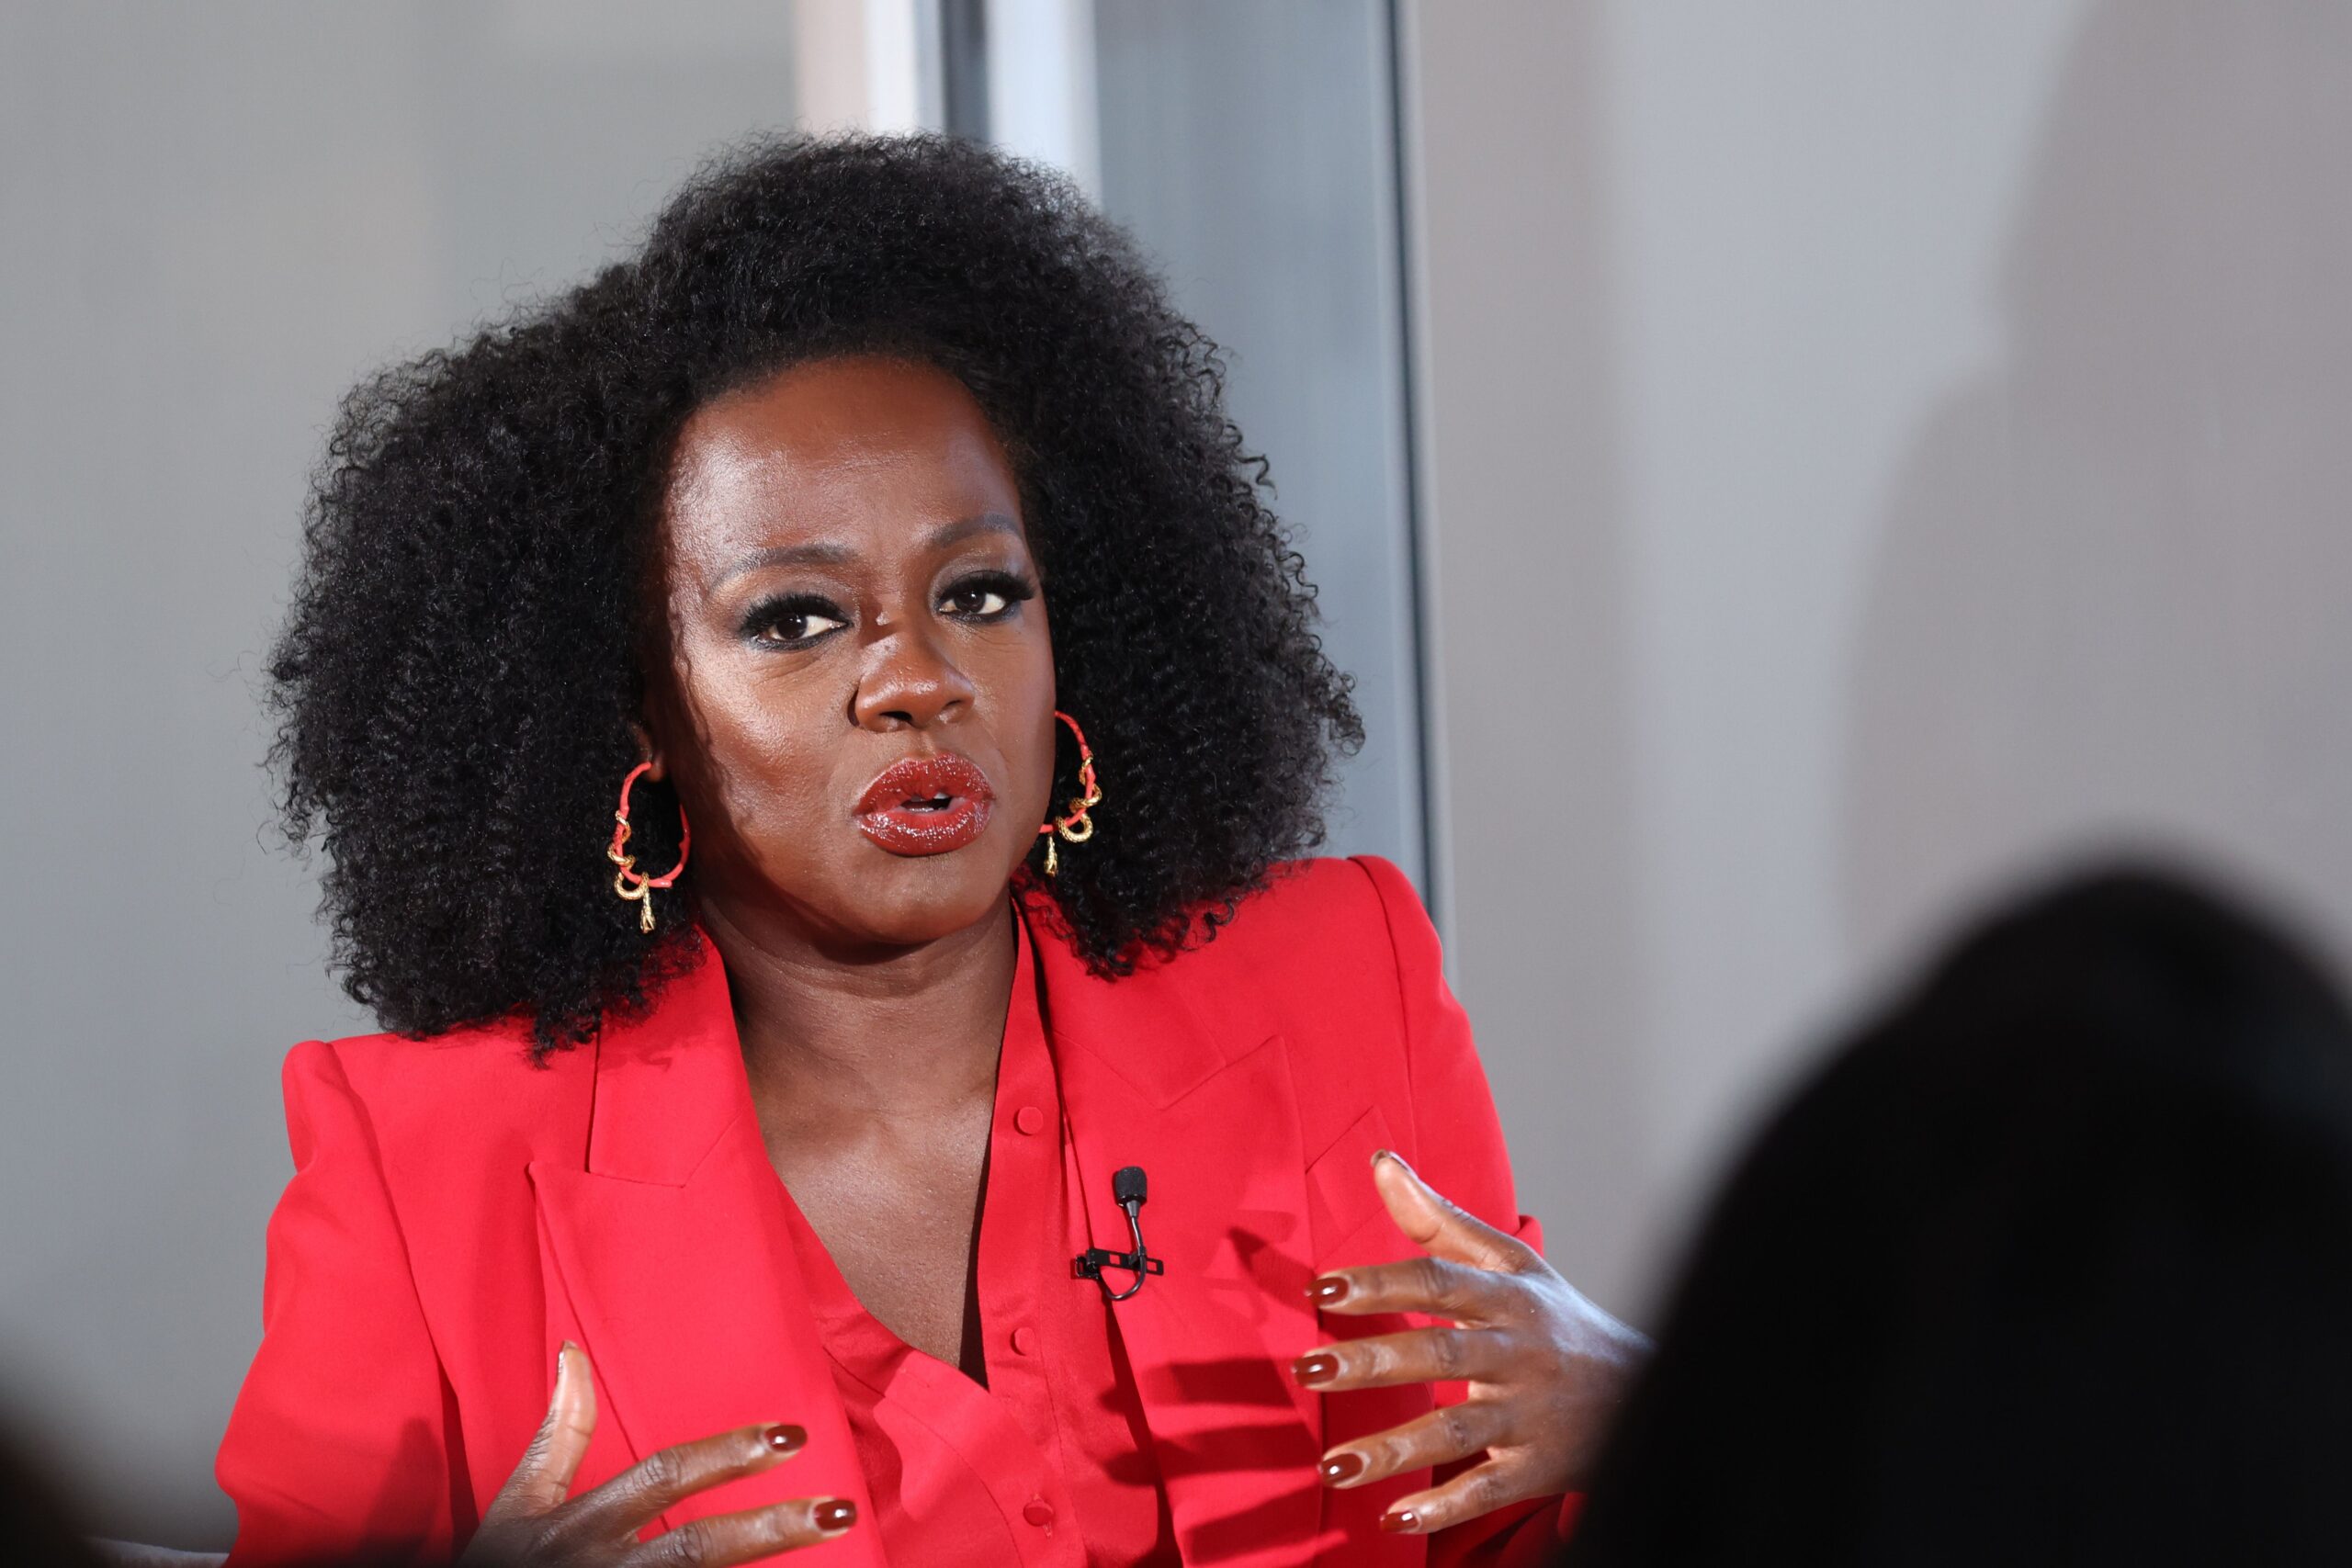 Viola Davis Talks Breaking Through Stereotypical Black Tropes with Her Role on ‘HTGAWM’